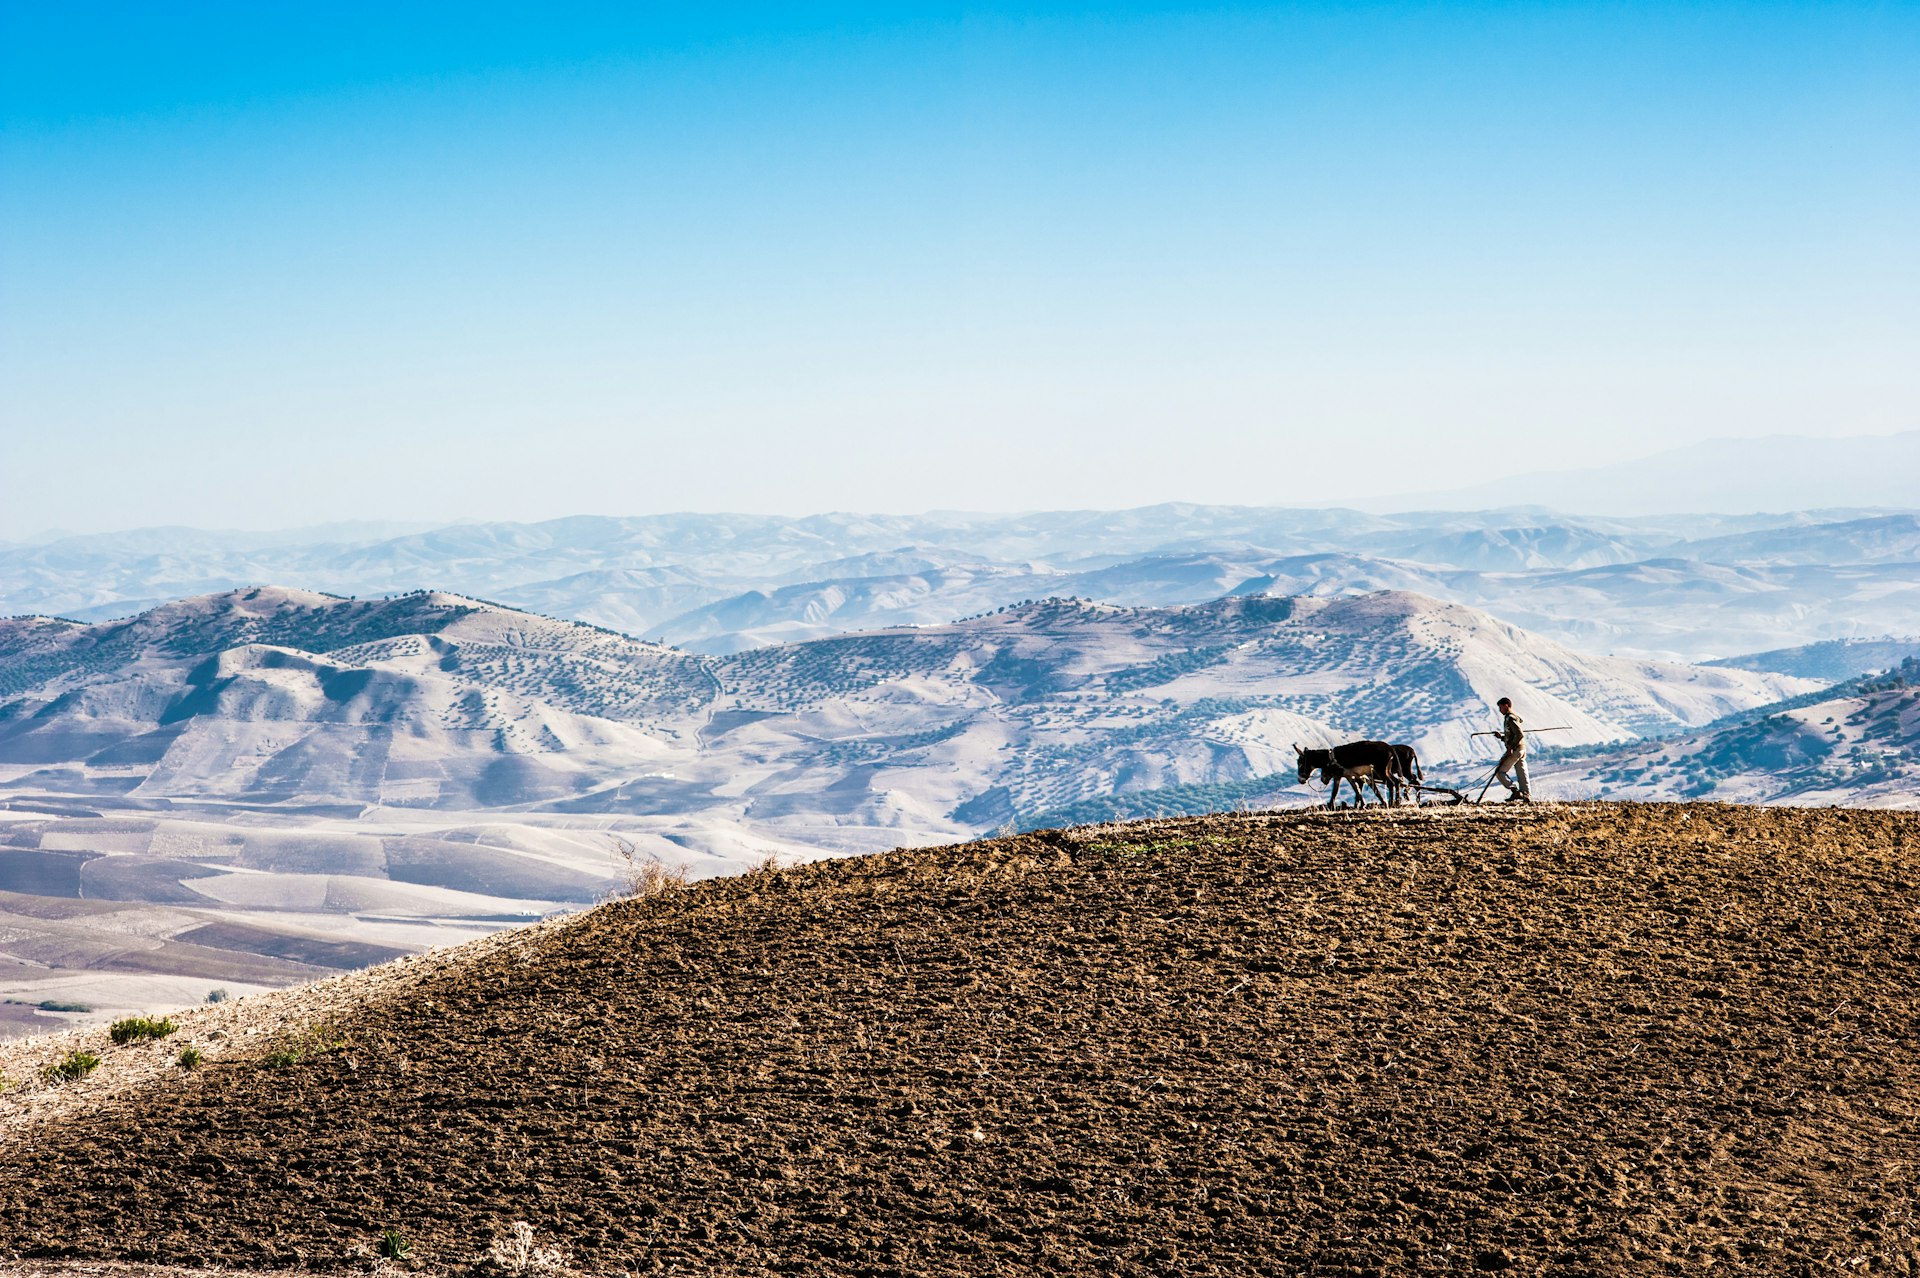 A farmer plows a field with a donkey in the High Atlas Mountains of Morocco